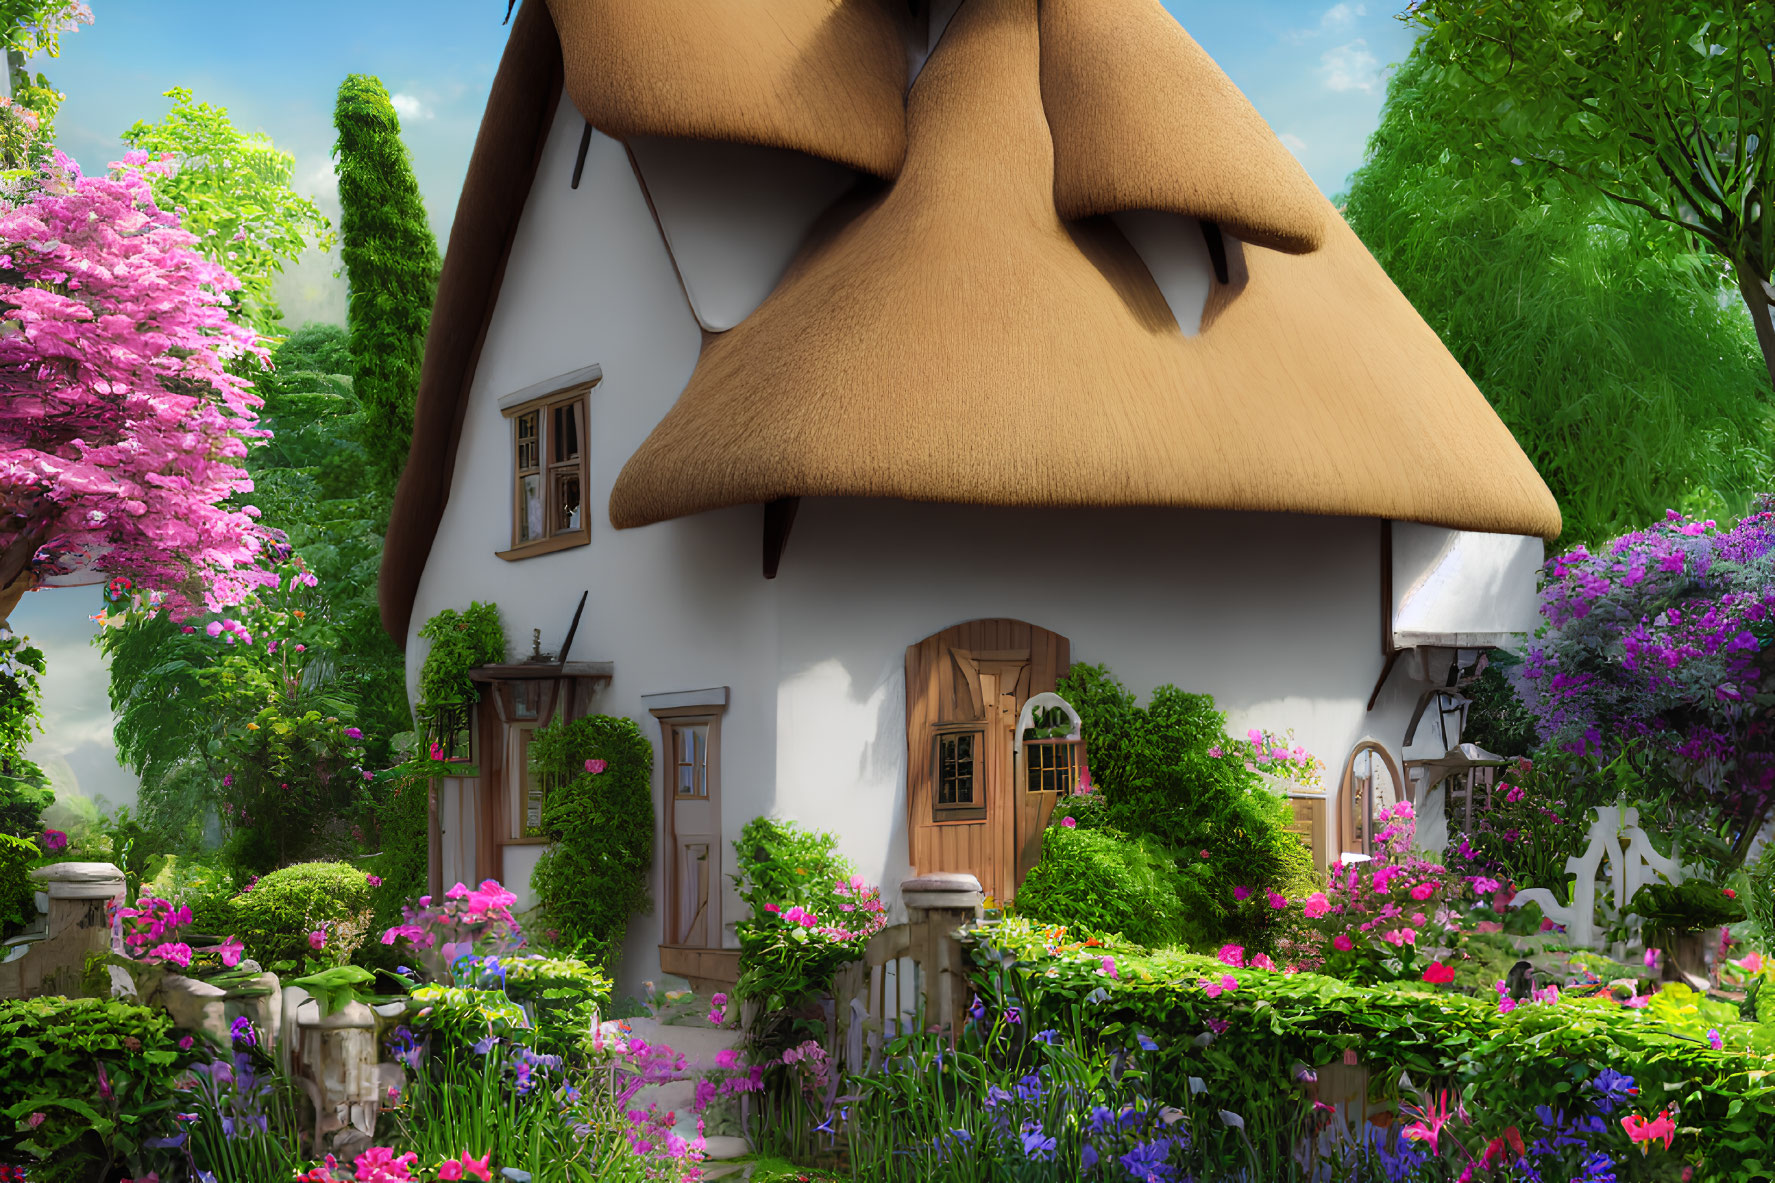 Thatched Roof Cottage Surrounded by Lush Gardens